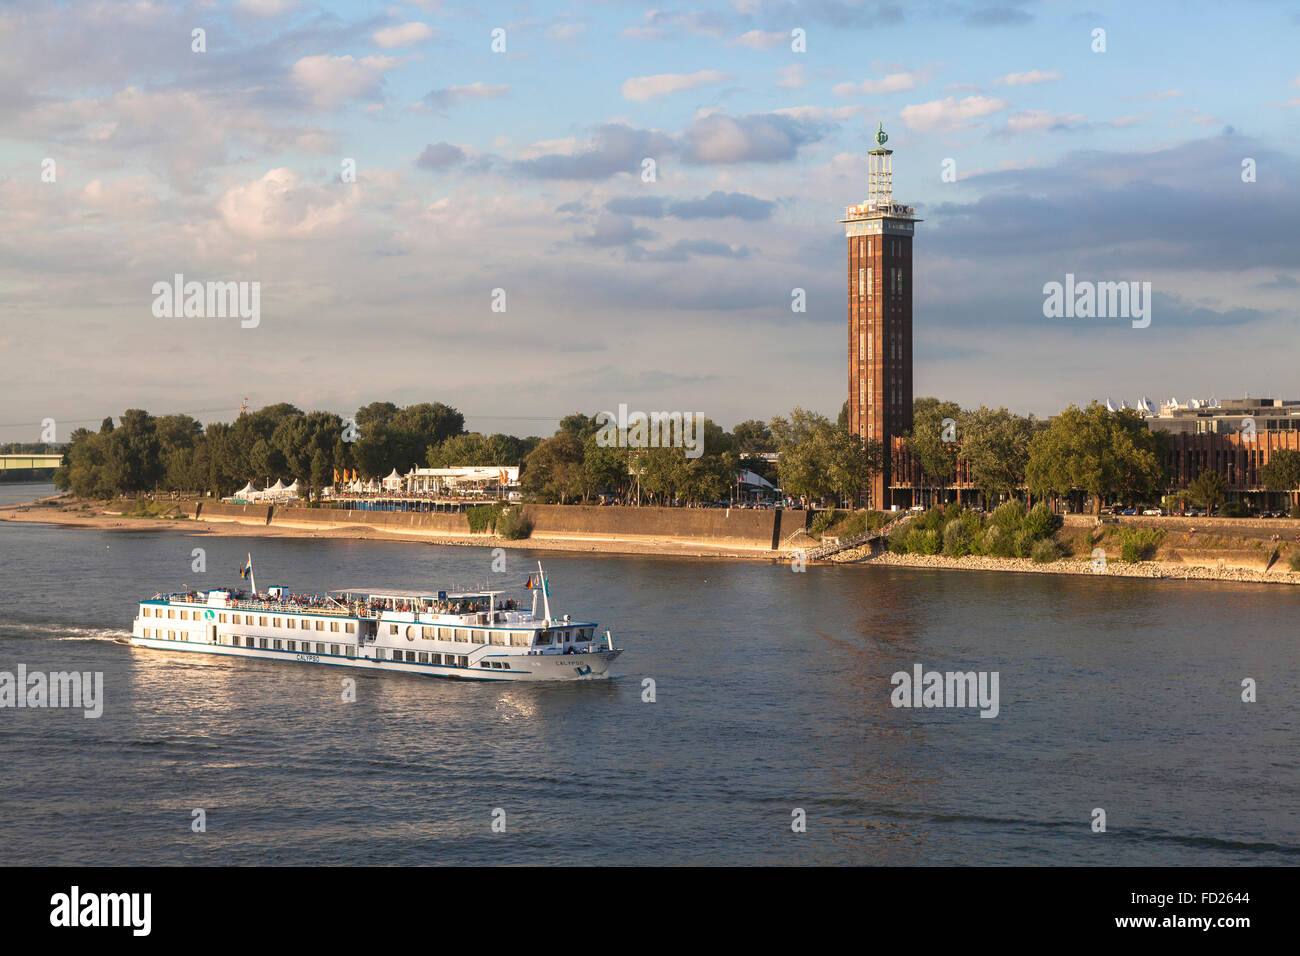 Europe, Germany, North Rhine-Westphalia, Cologne, view across the river Rhine to the old tower of the former exhibition center a Stock Photo